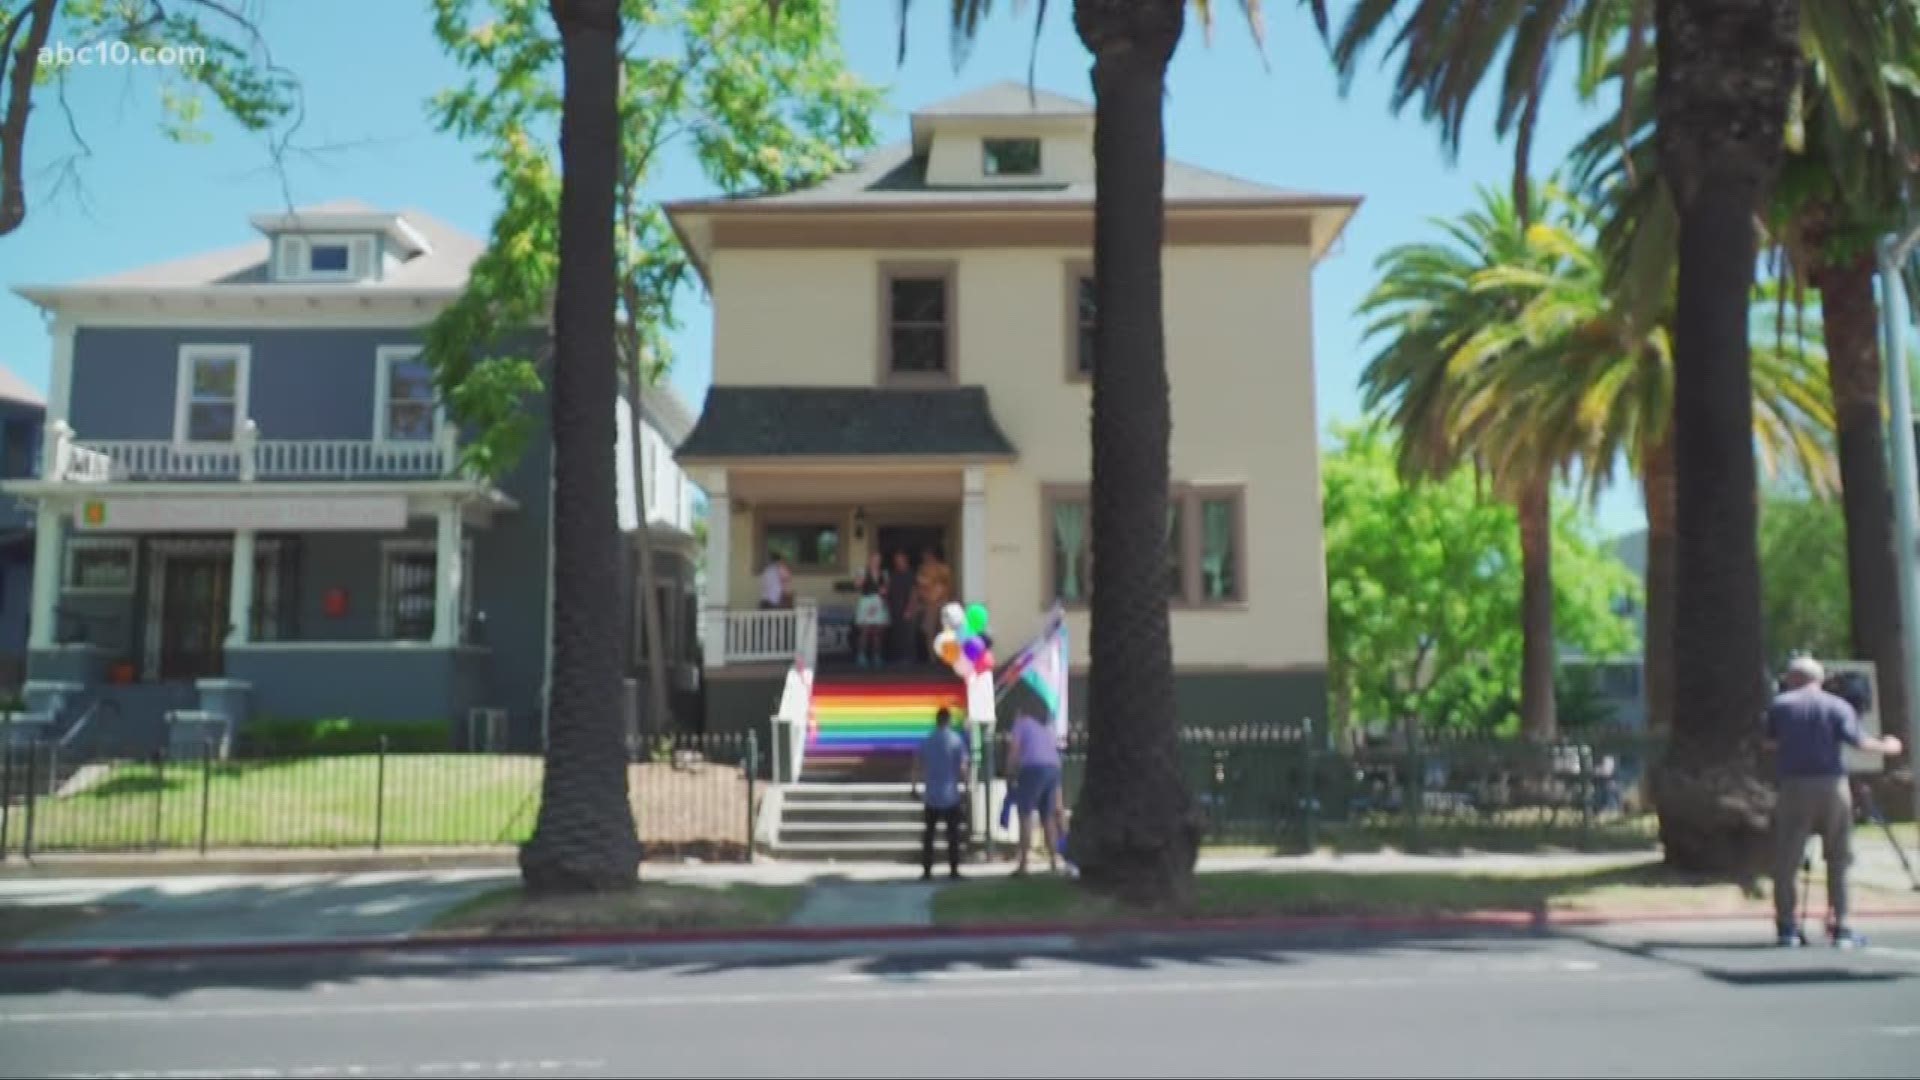 On July 1, the Sacramento LGBT Community Center will welcome its first guests at its Short Term Emergency Program [STEP] shelter.